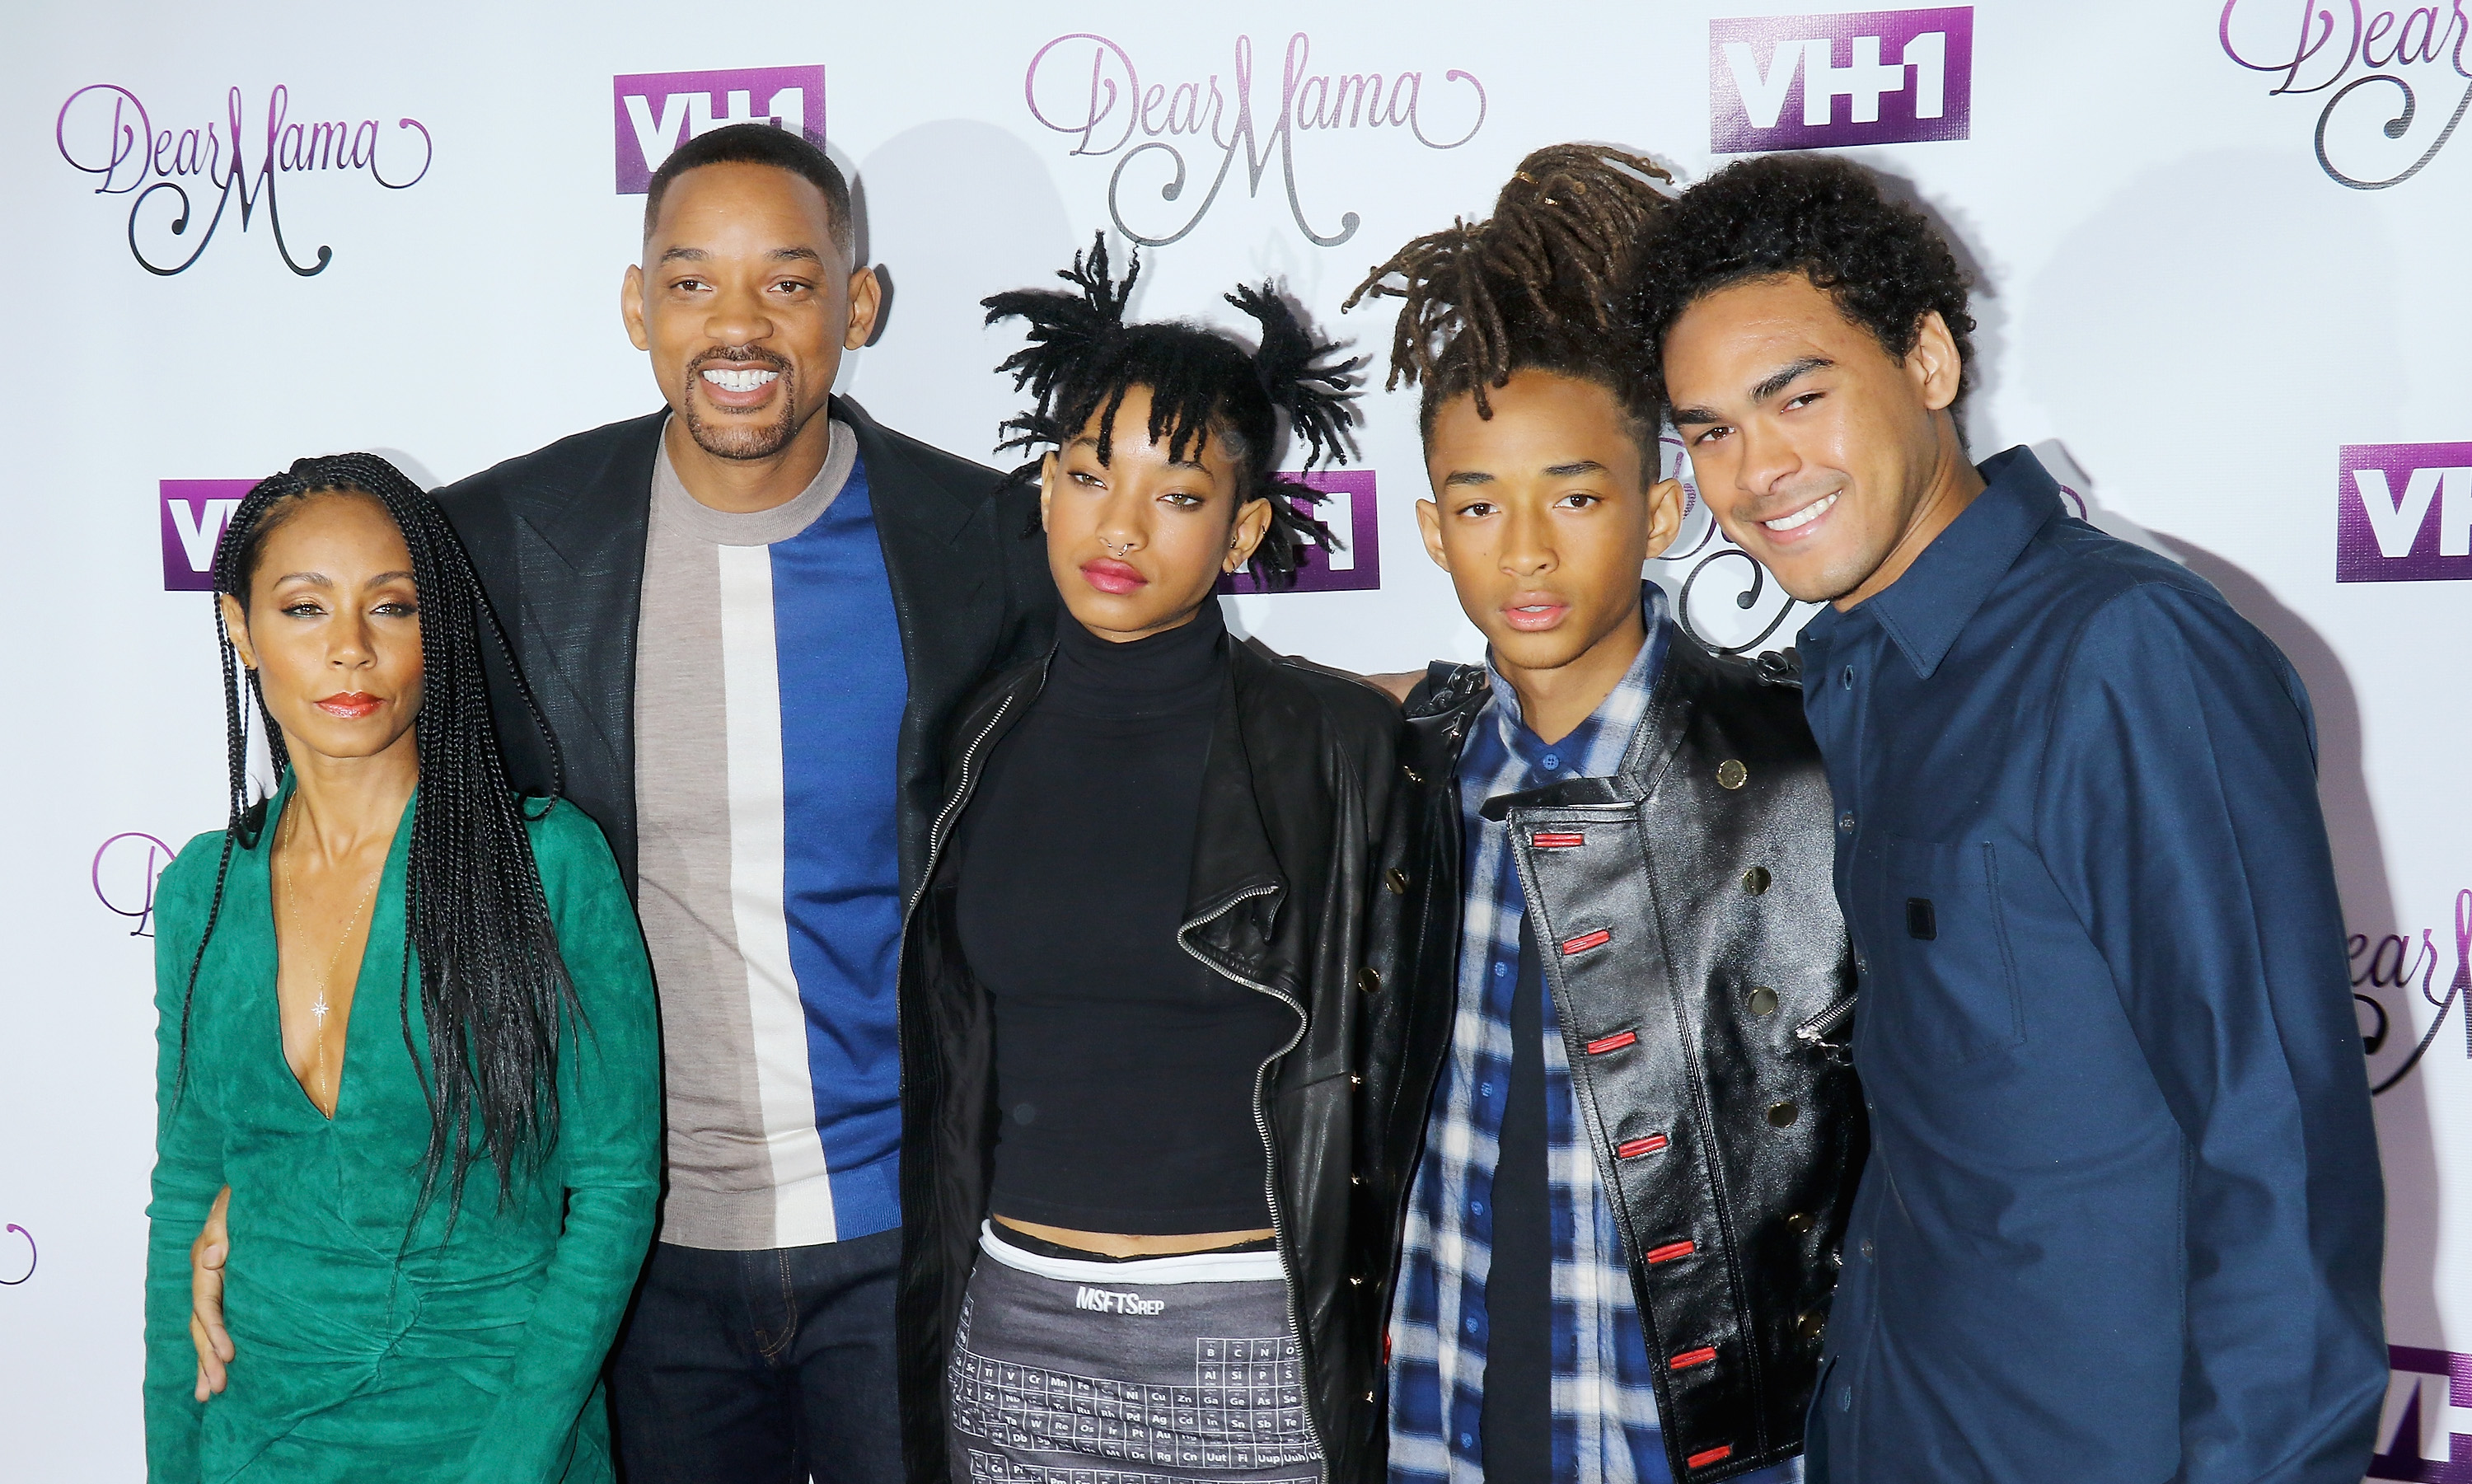 Jada Pinkett Smith, Will Smith, Willow Smith, Jaden Smith and Trey Smith attend the VH1's "Dear Mama" taping in 2016 in New York City | Jim Spellman/WireImage